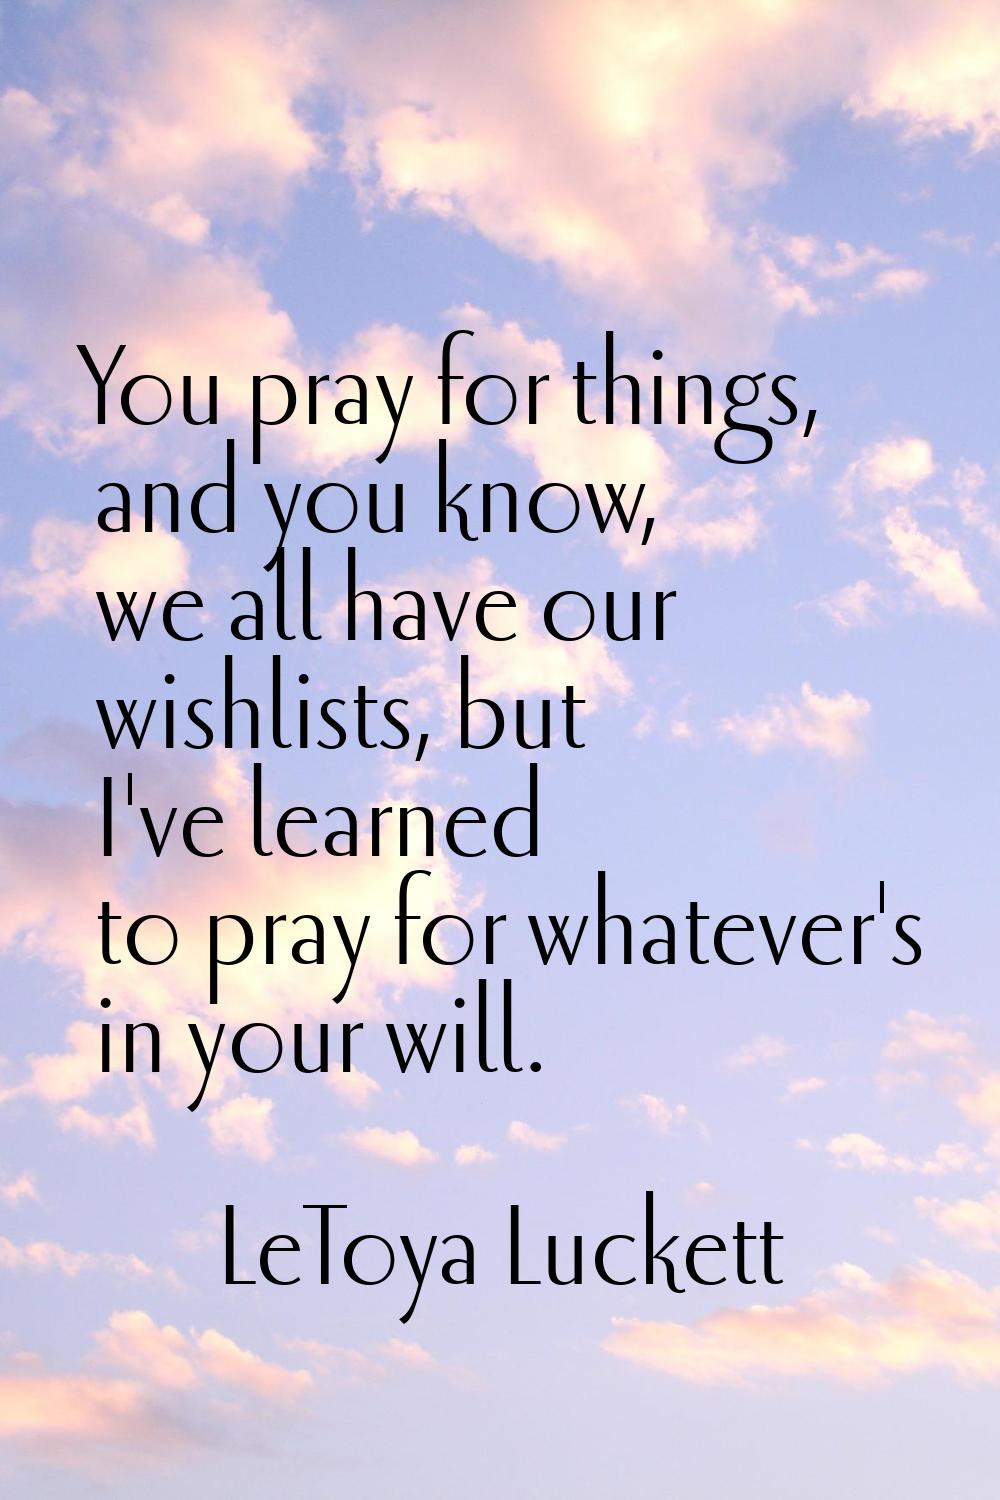 You pray for things, and you know, we all have our wishlists, but I've learned to pray for whatever